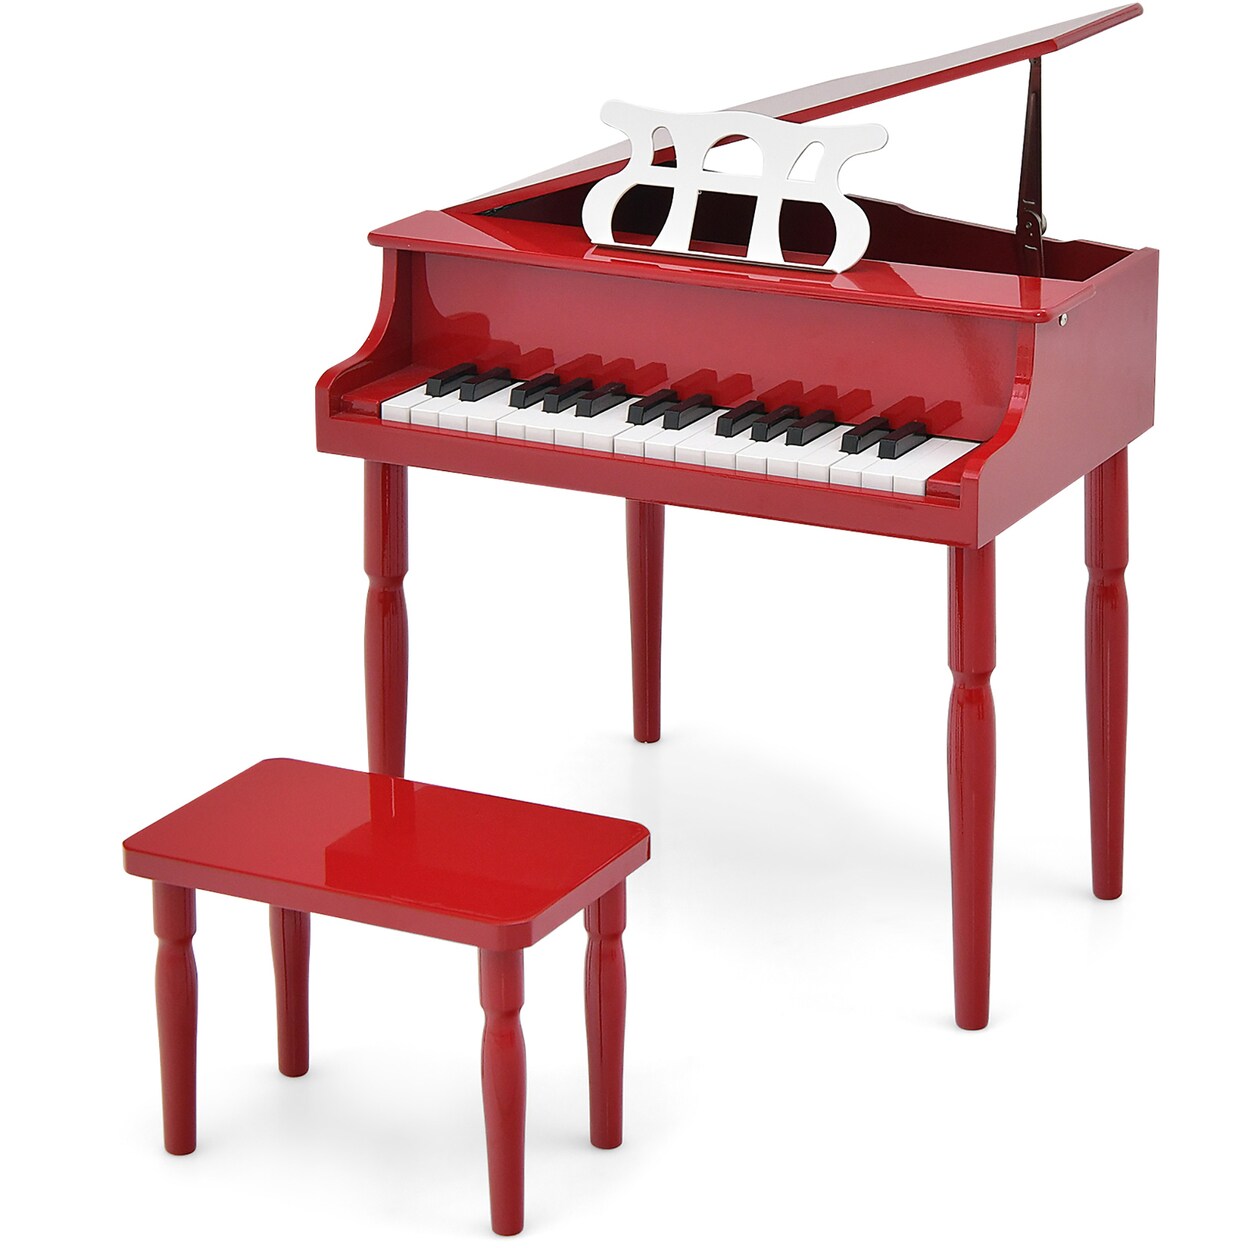 Gymax 30-Key Classic Baby Grand Piano Toddler Toy Wood w/ Bench and Music Rack Red